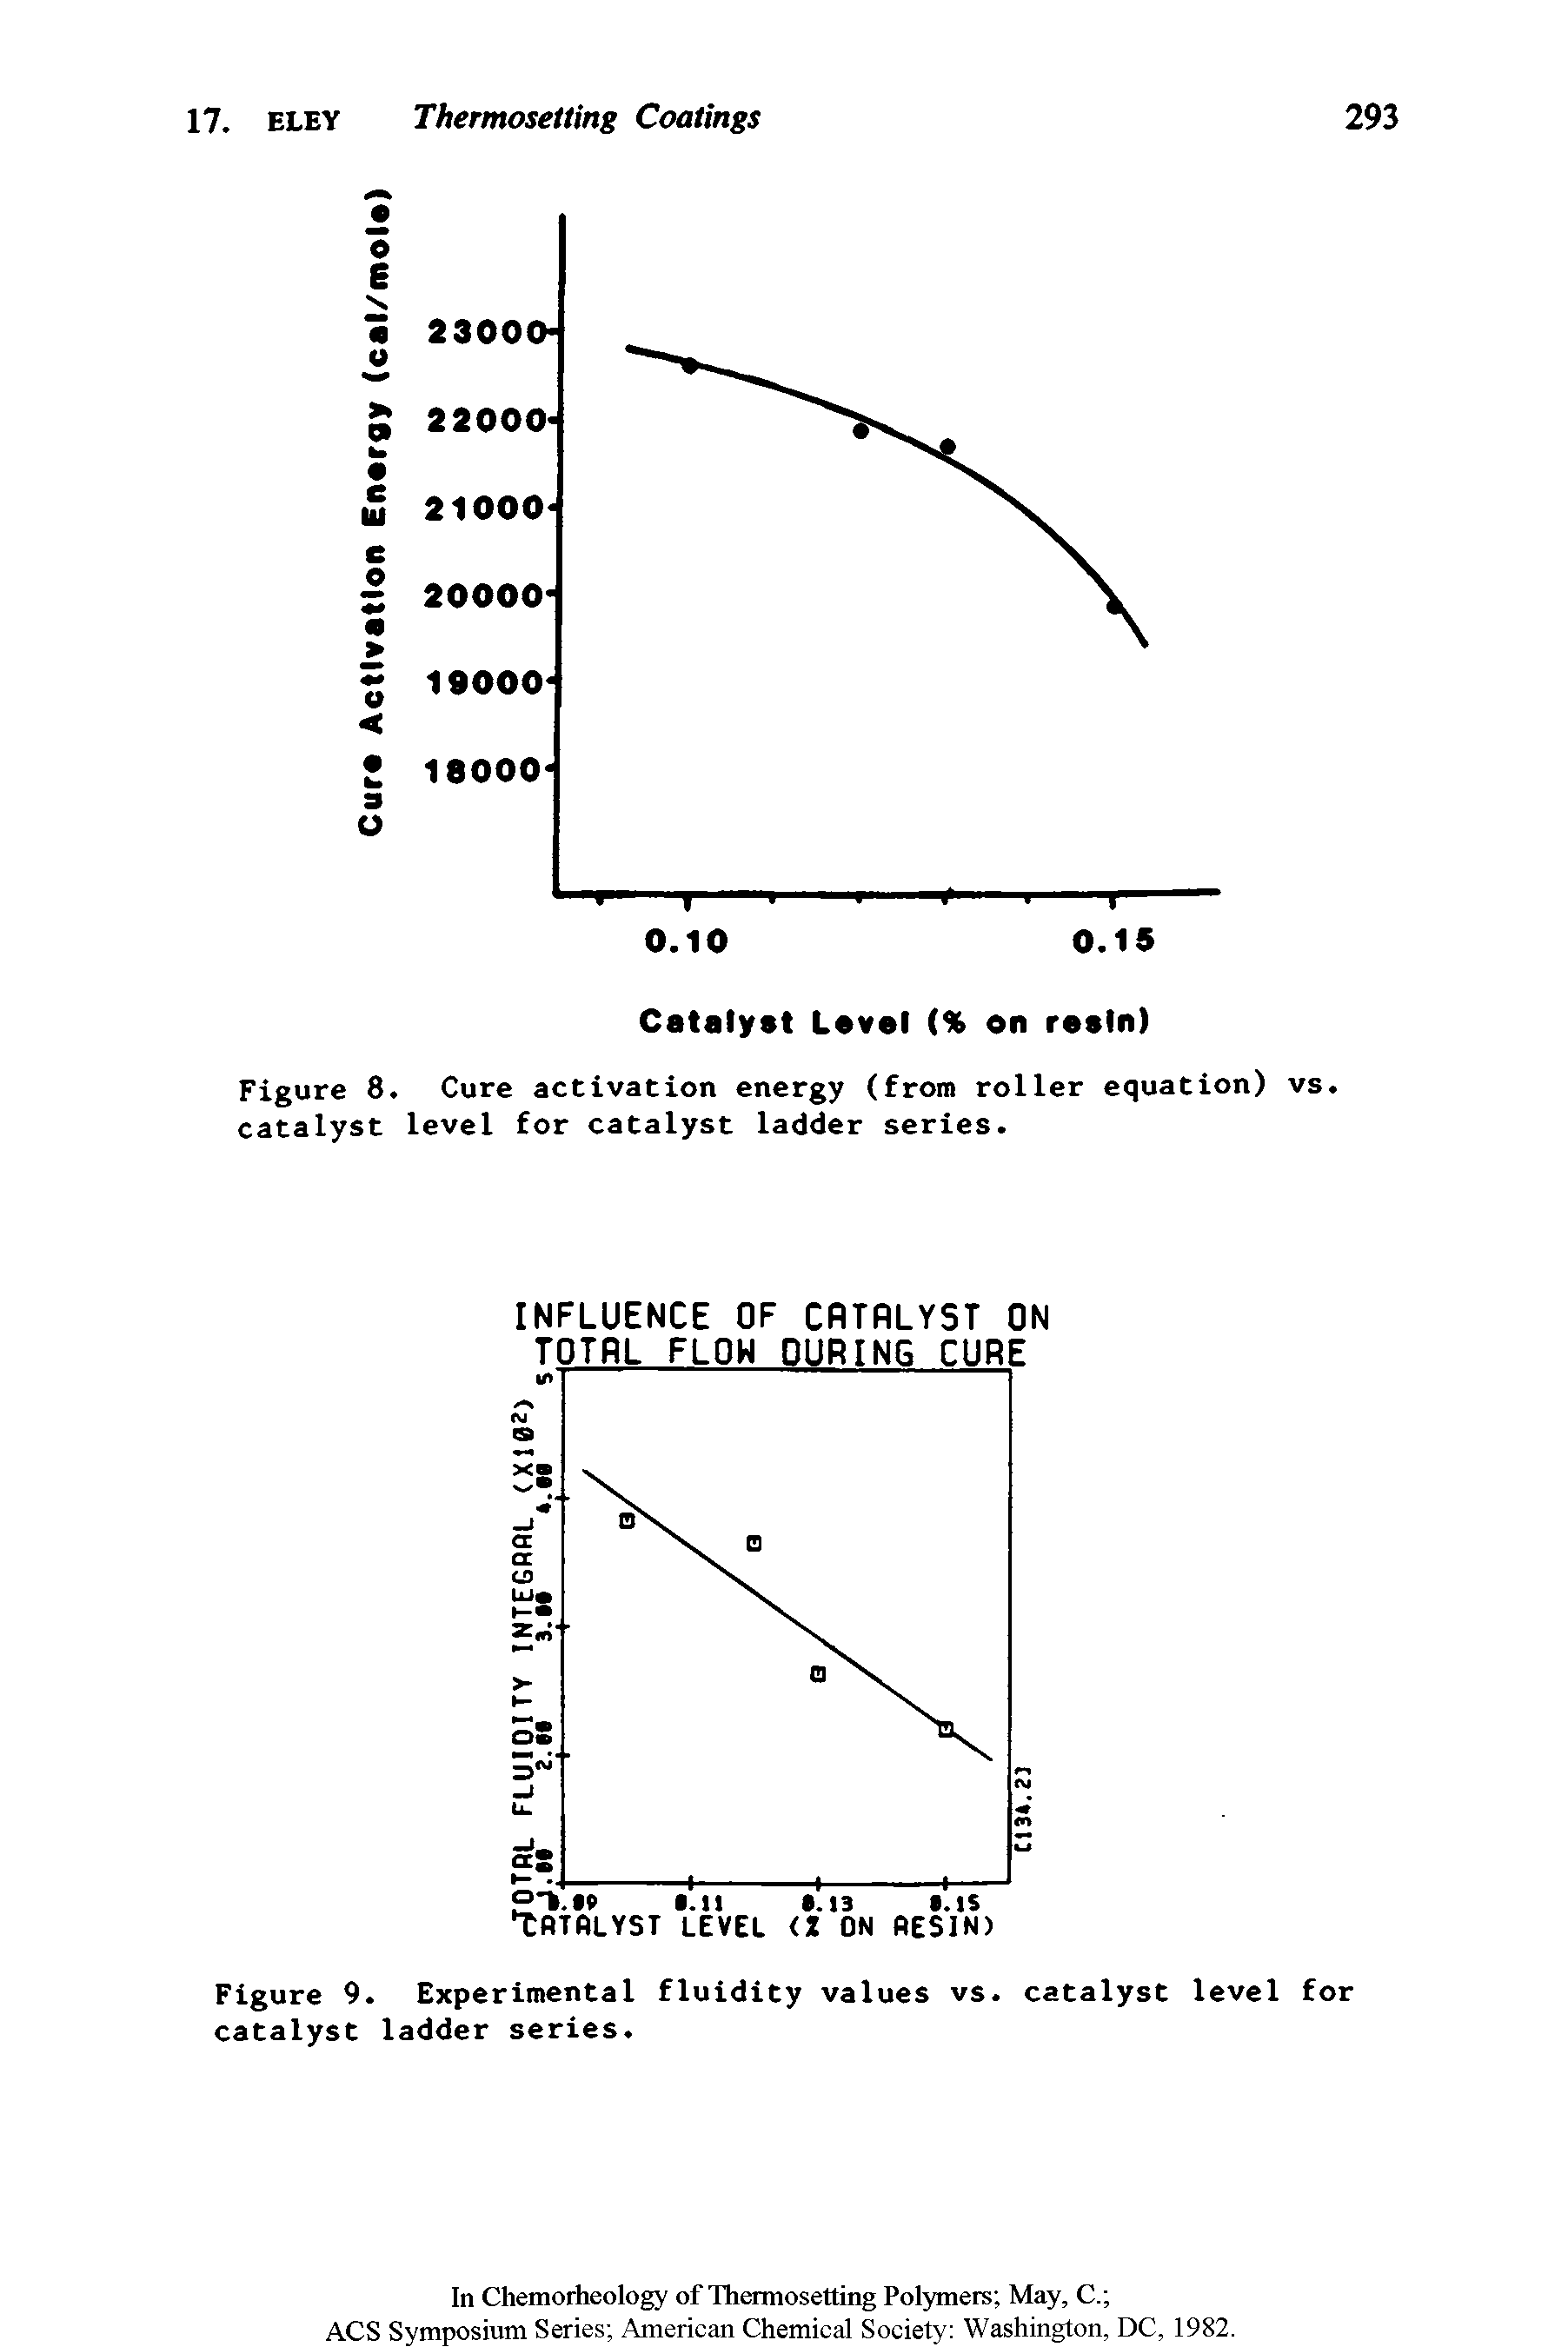 Figure 8. Cure activation energy (from roller equation) vs. catalyst level for catalyst ladder series.